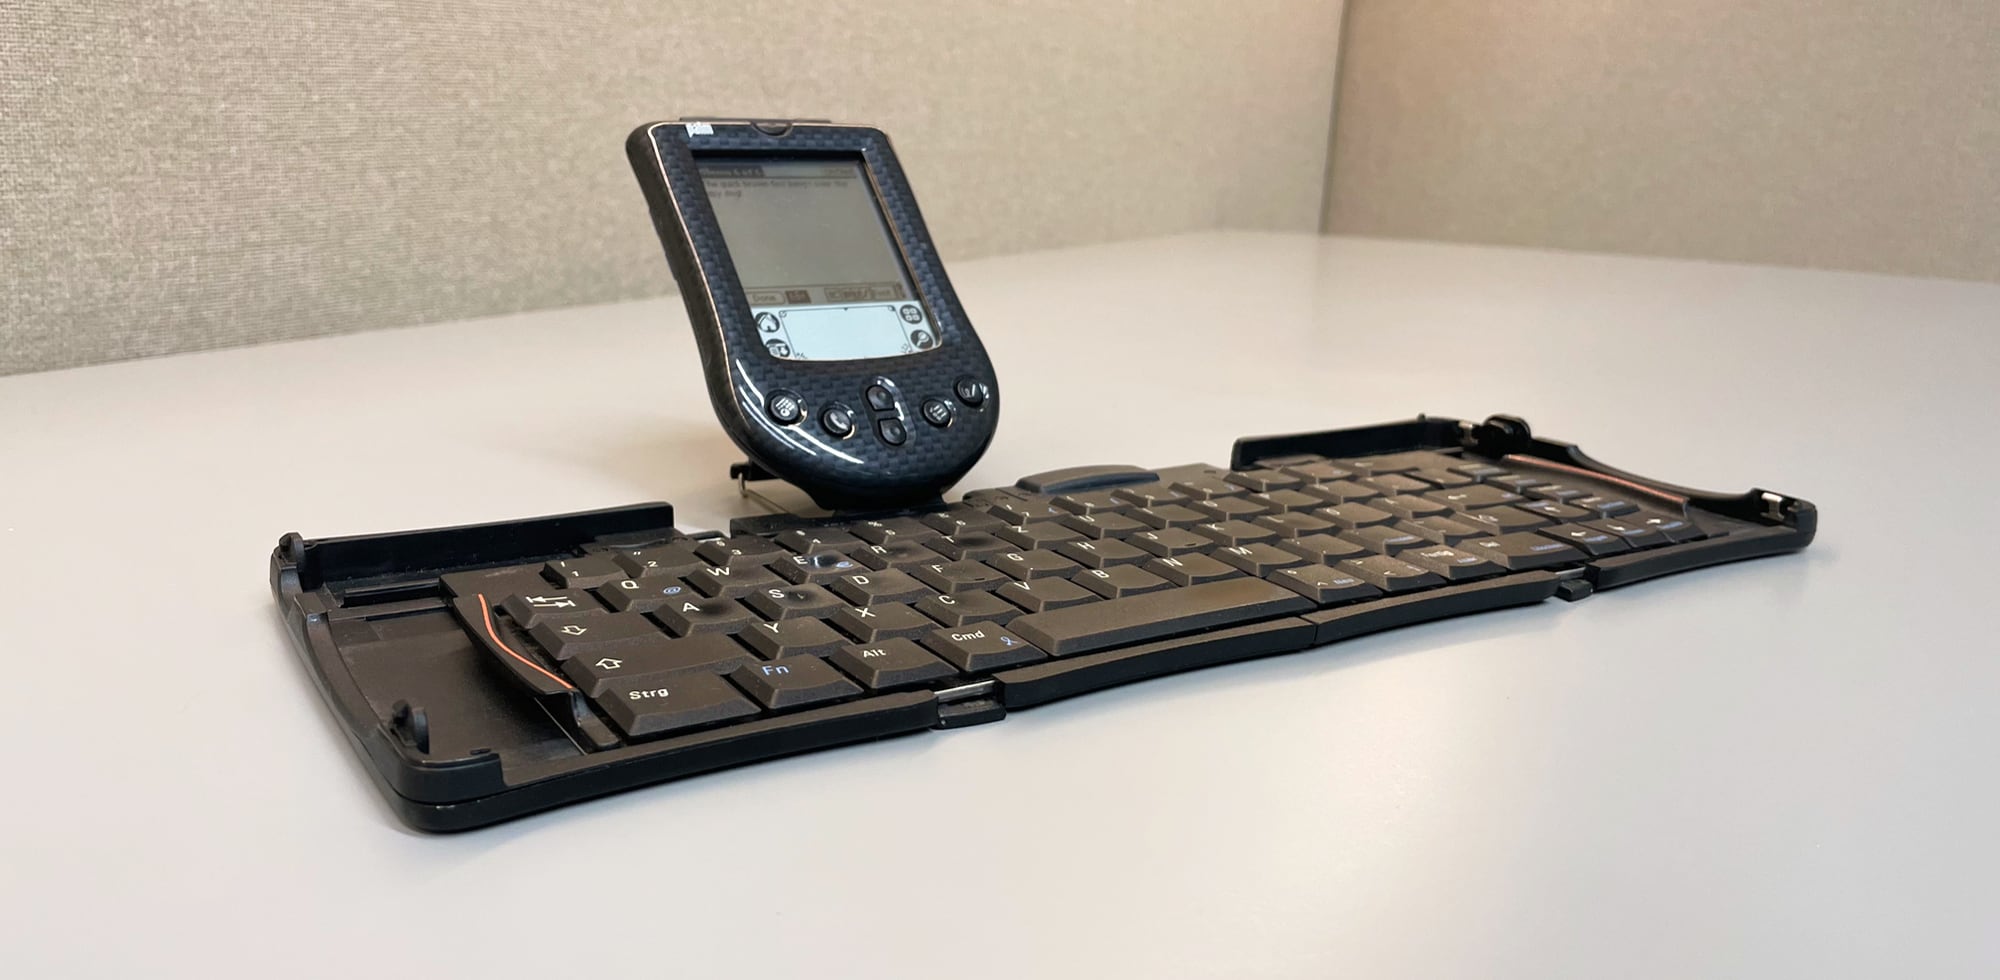 The Palm m125 with an open foldable keyboard